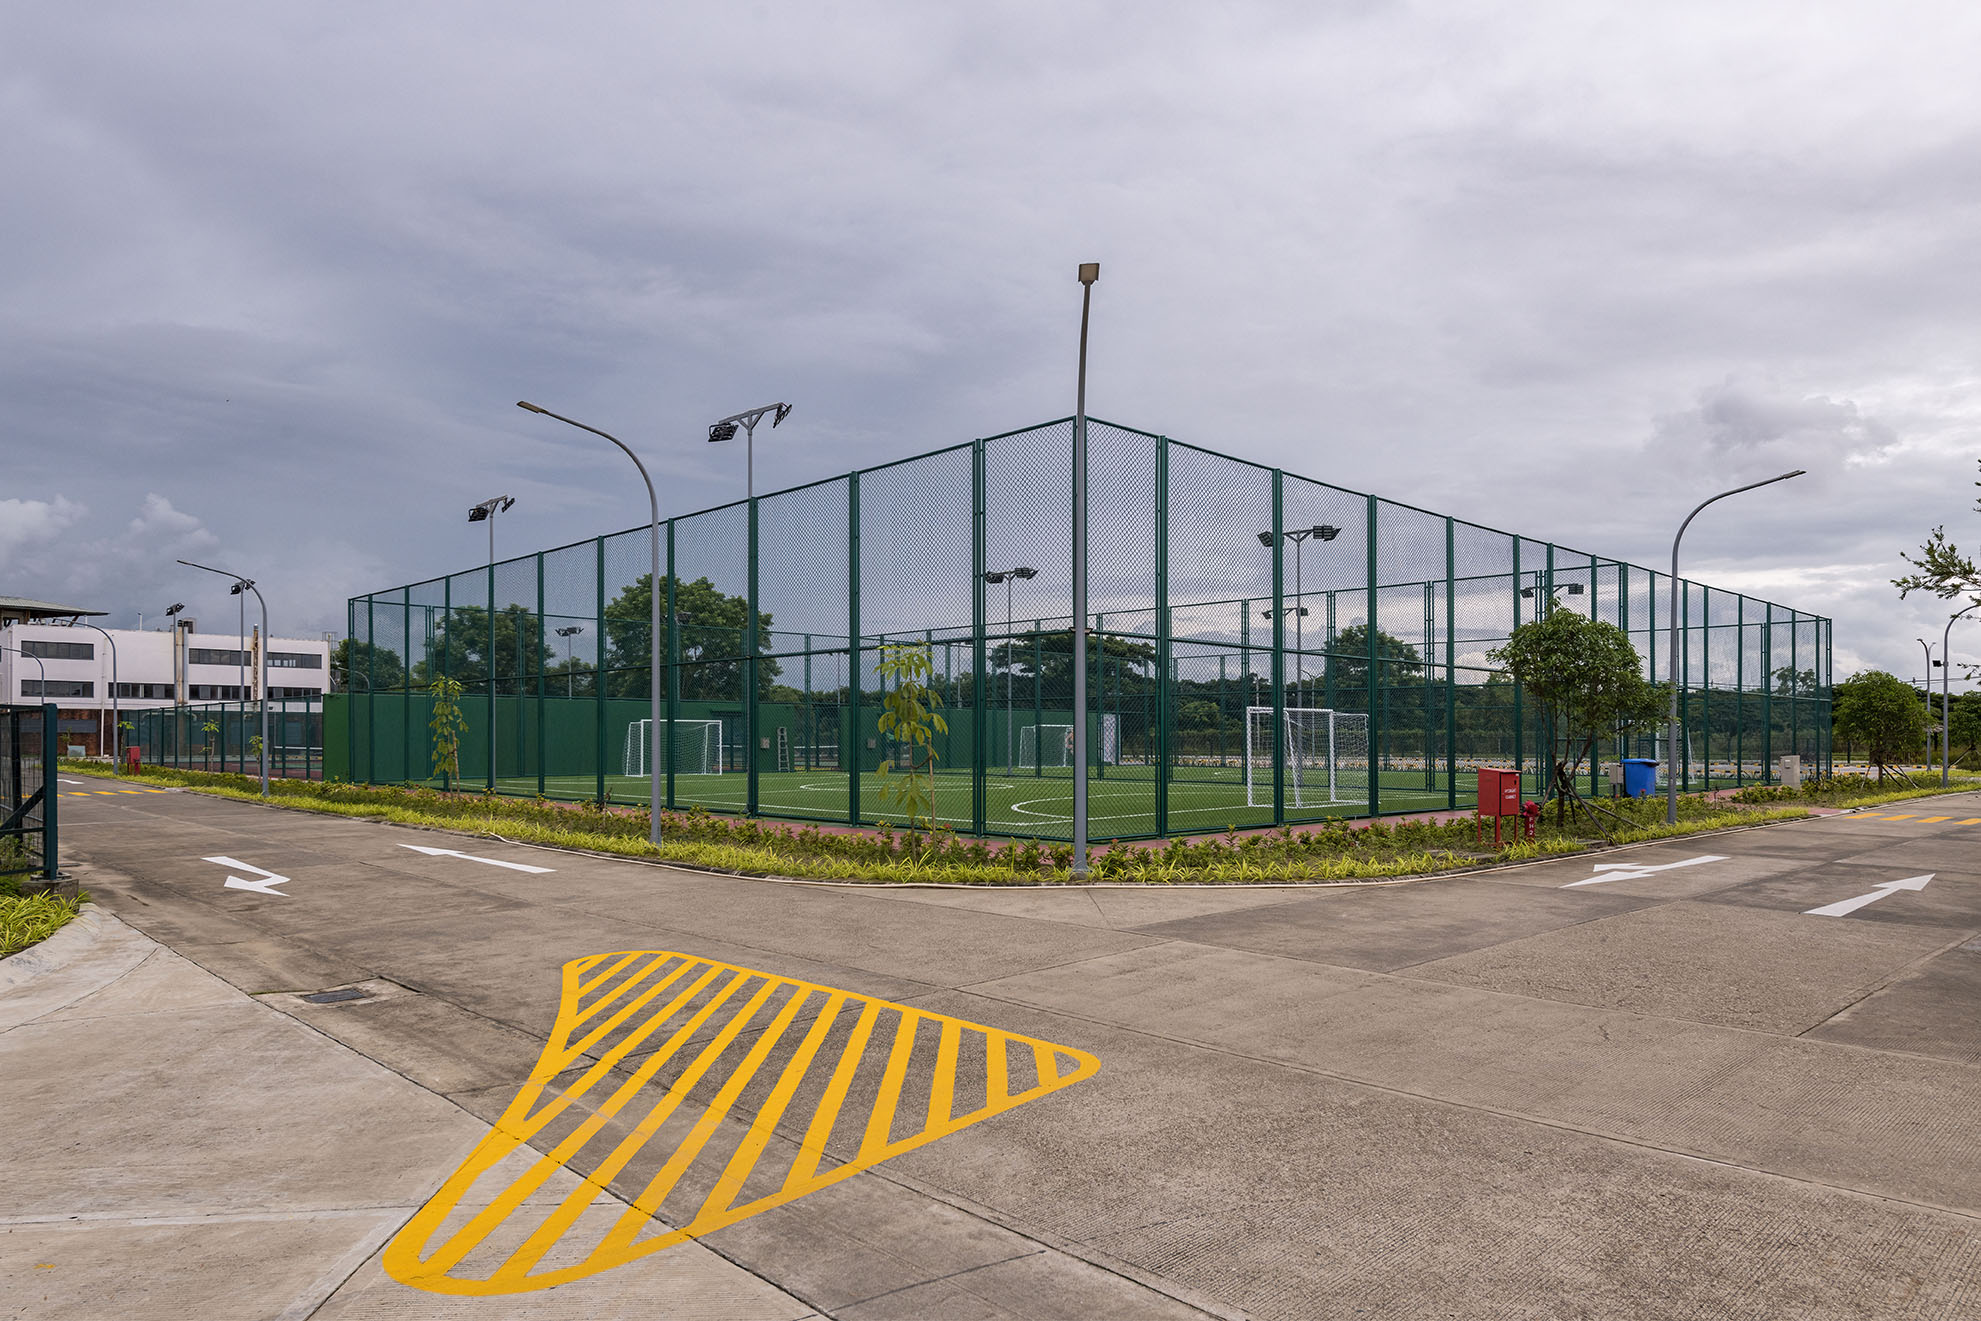 a view of a futsal court from outside